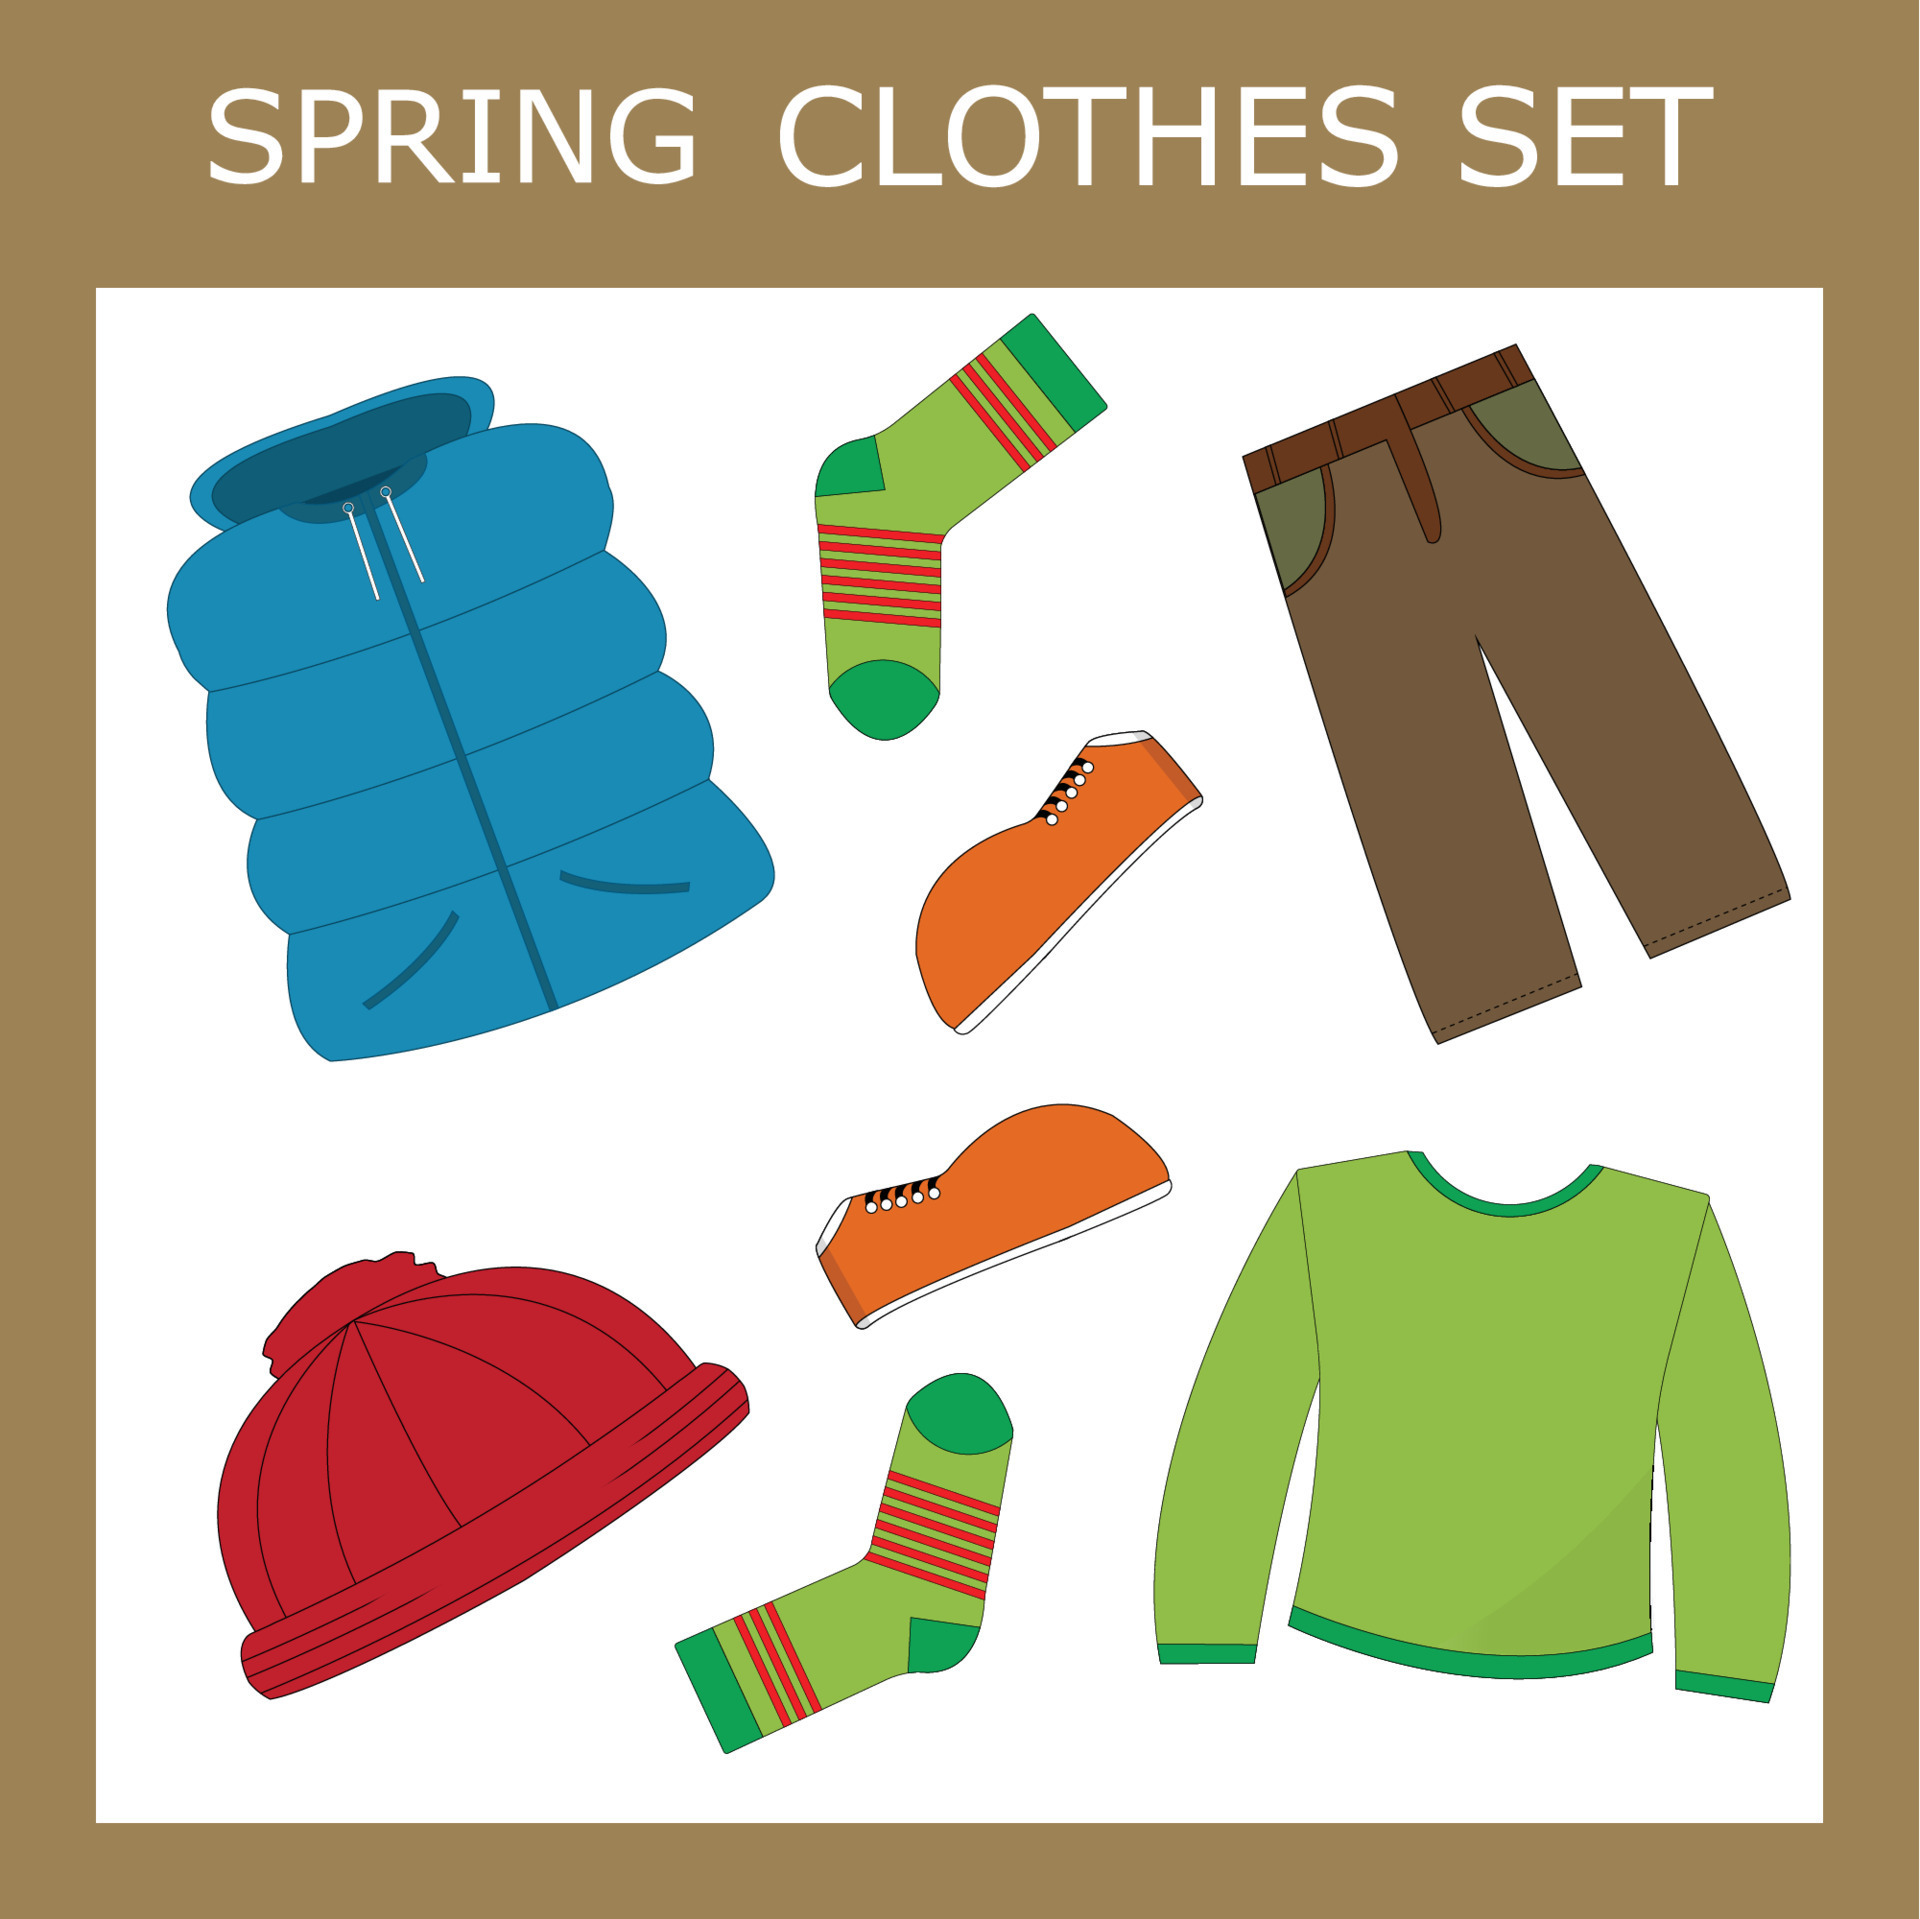 Children's seasonal clothes. Season of clothing for spring